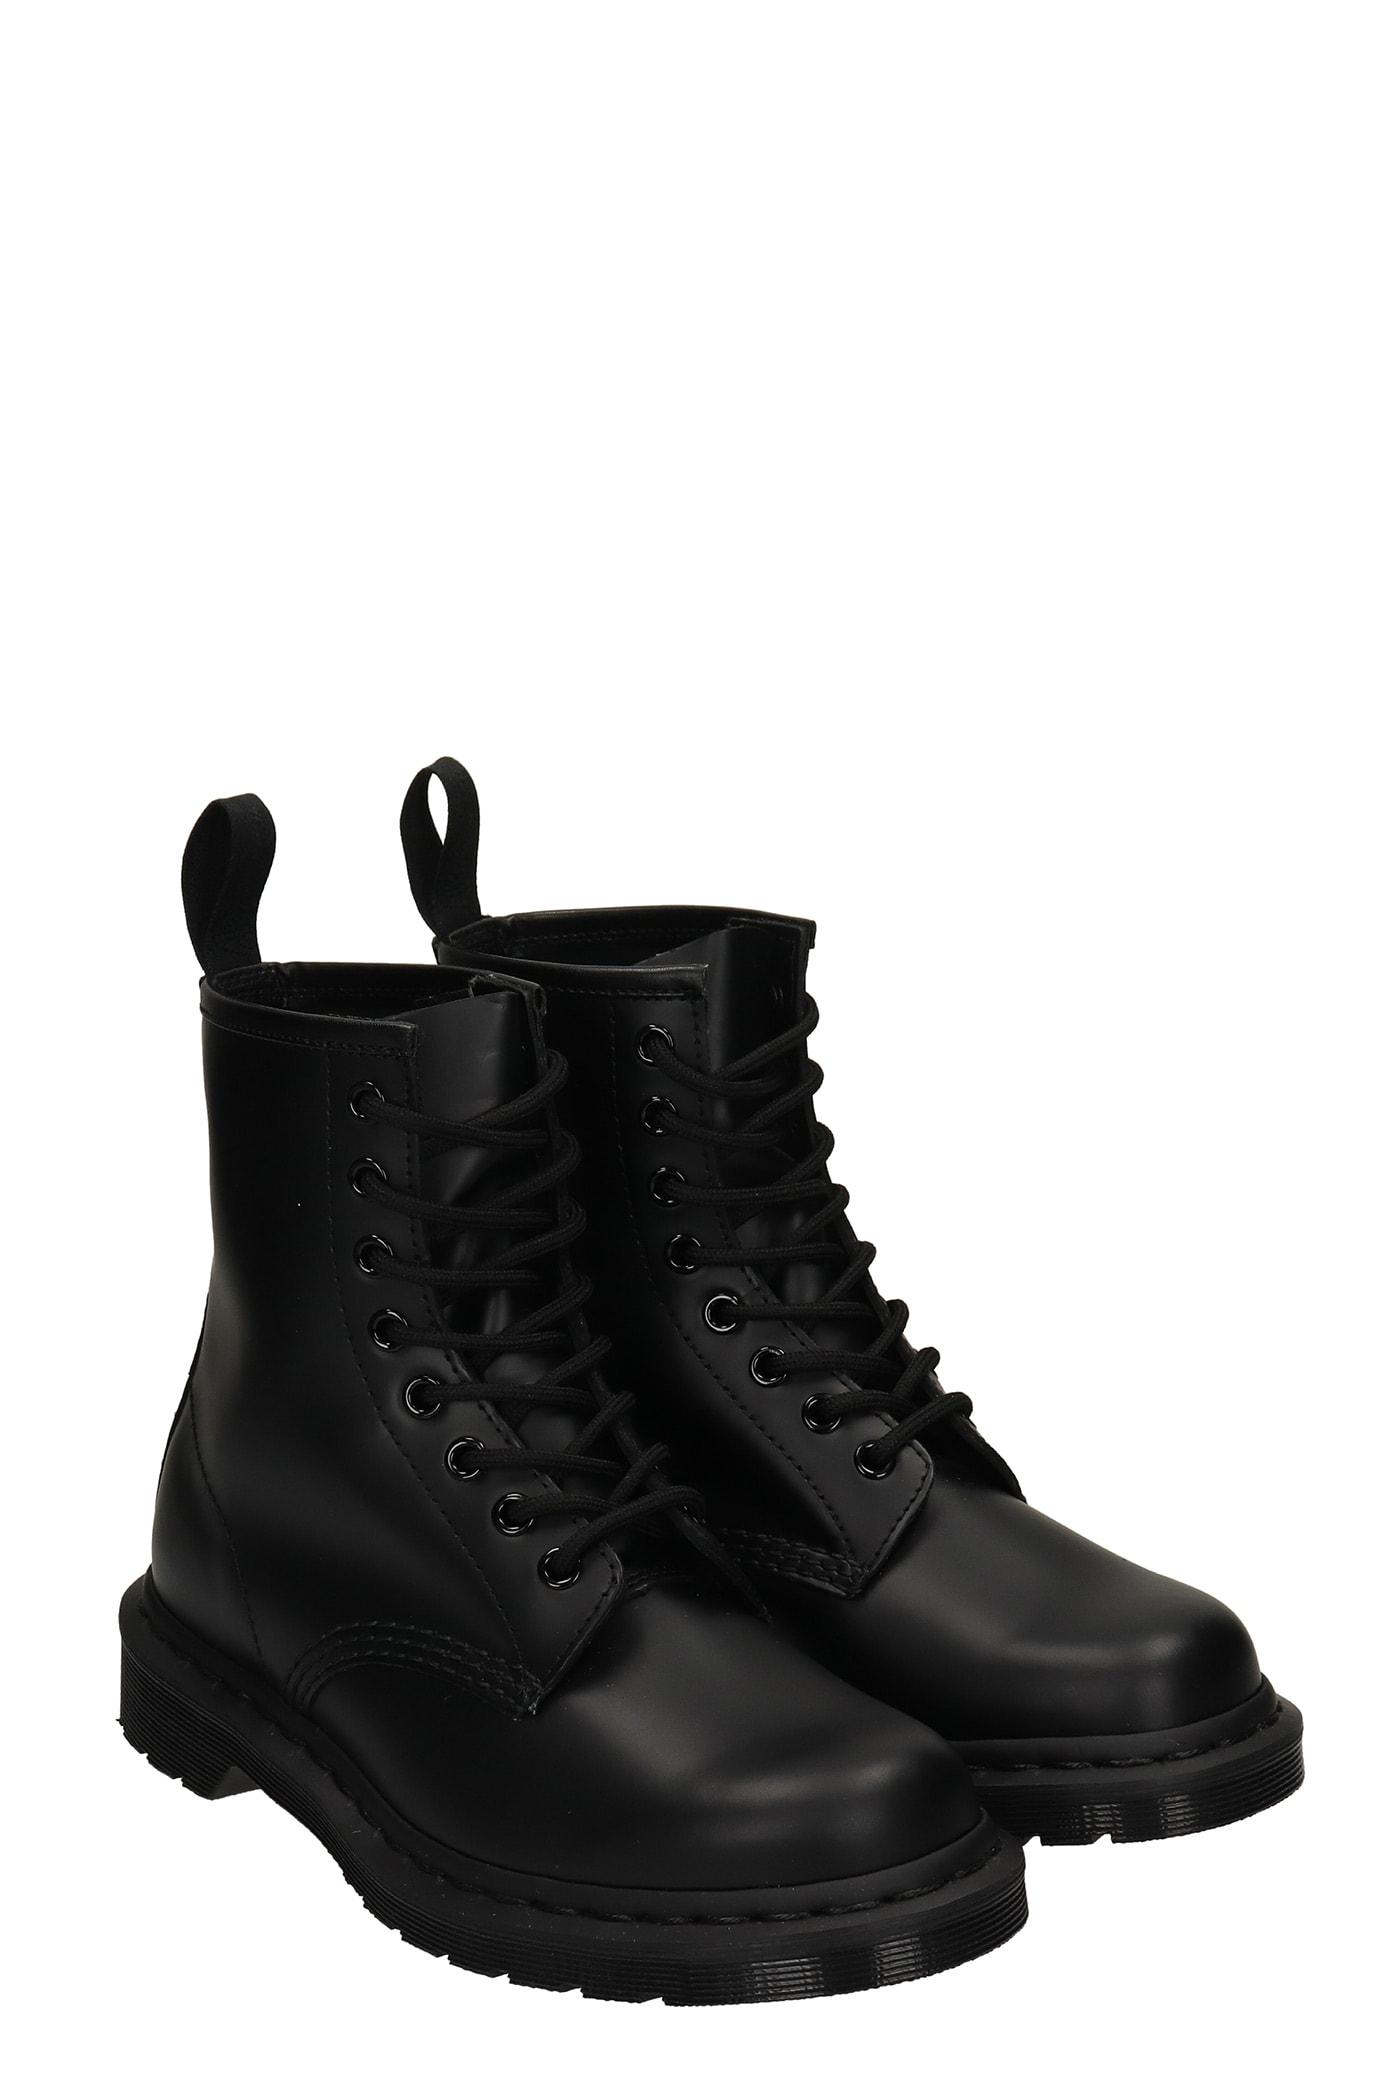 Dr. Martens 1460 Mono Combat Boots In Black Leather - Save 13% - Lyst